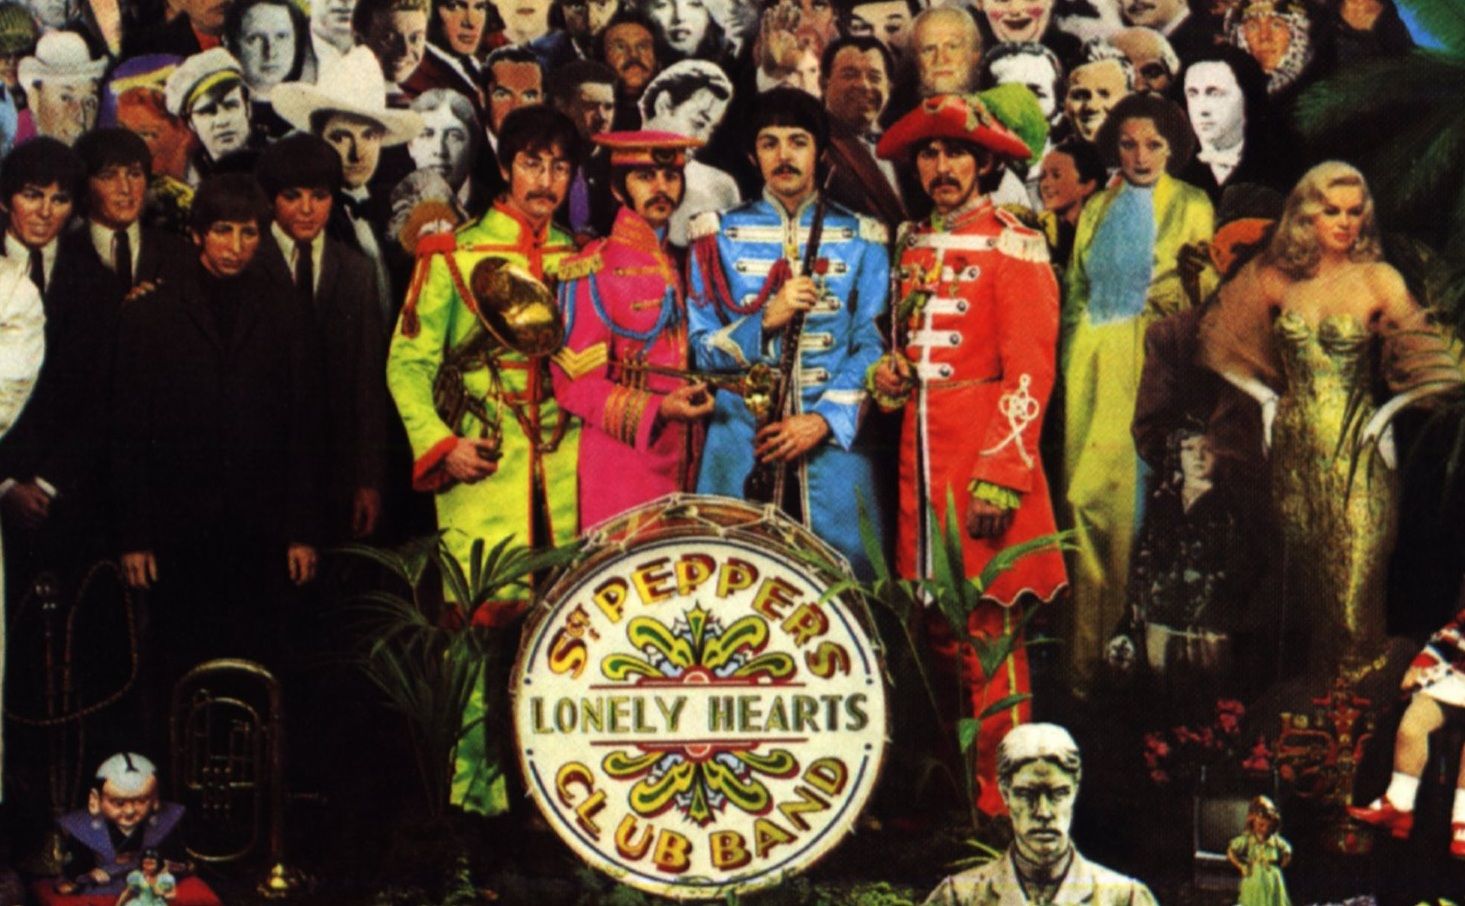 Sgt Peppers Lonely Hearts Club Band Wallpaper Pepper S